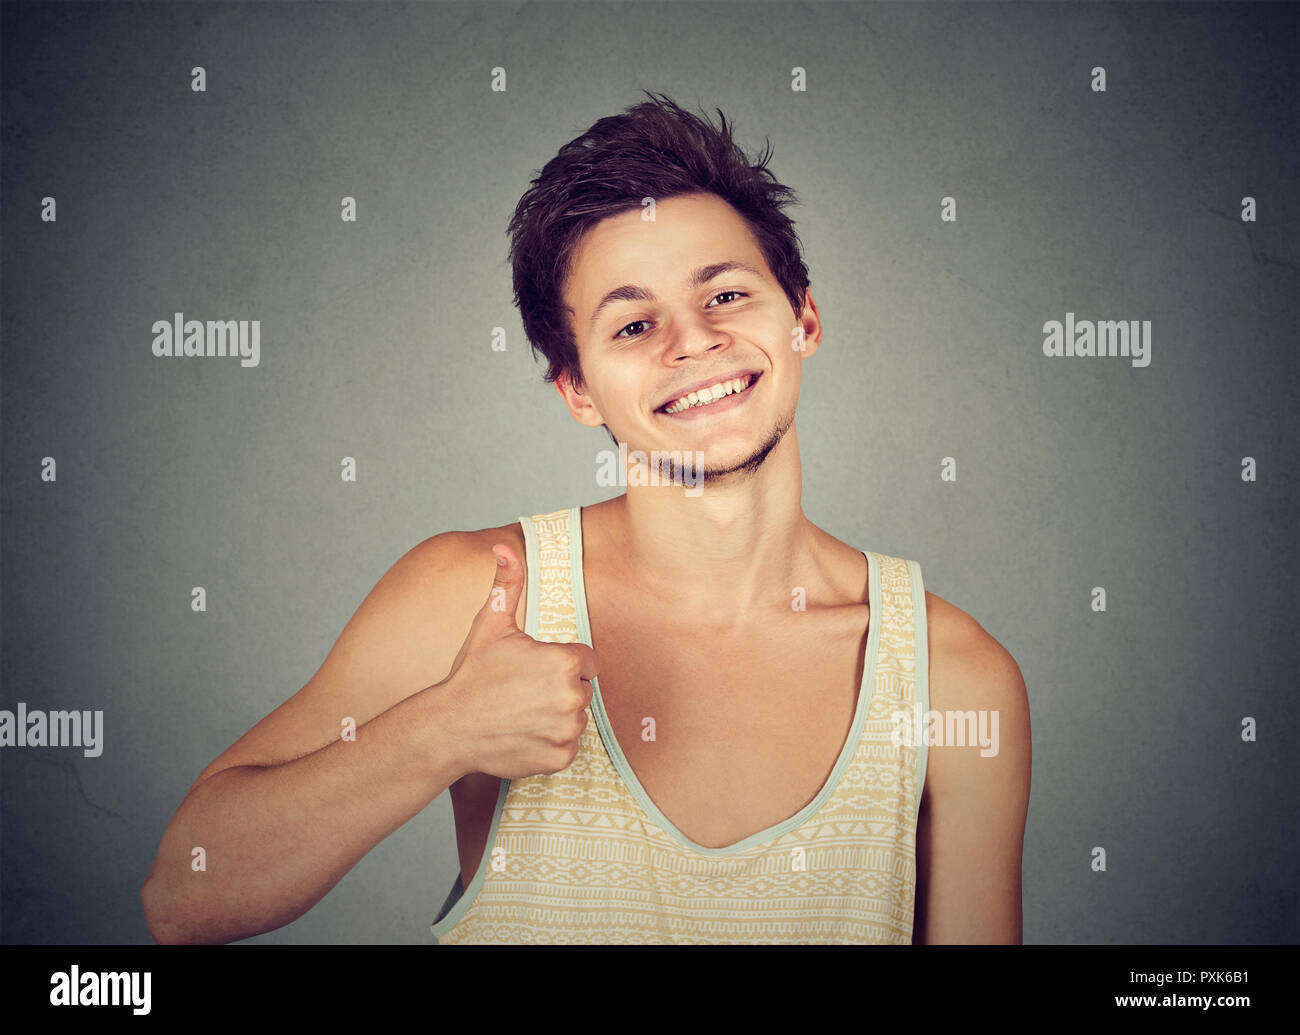 Cheerful teenager man in tank top holding thumb up smiling at camera on gray background Stock Photo